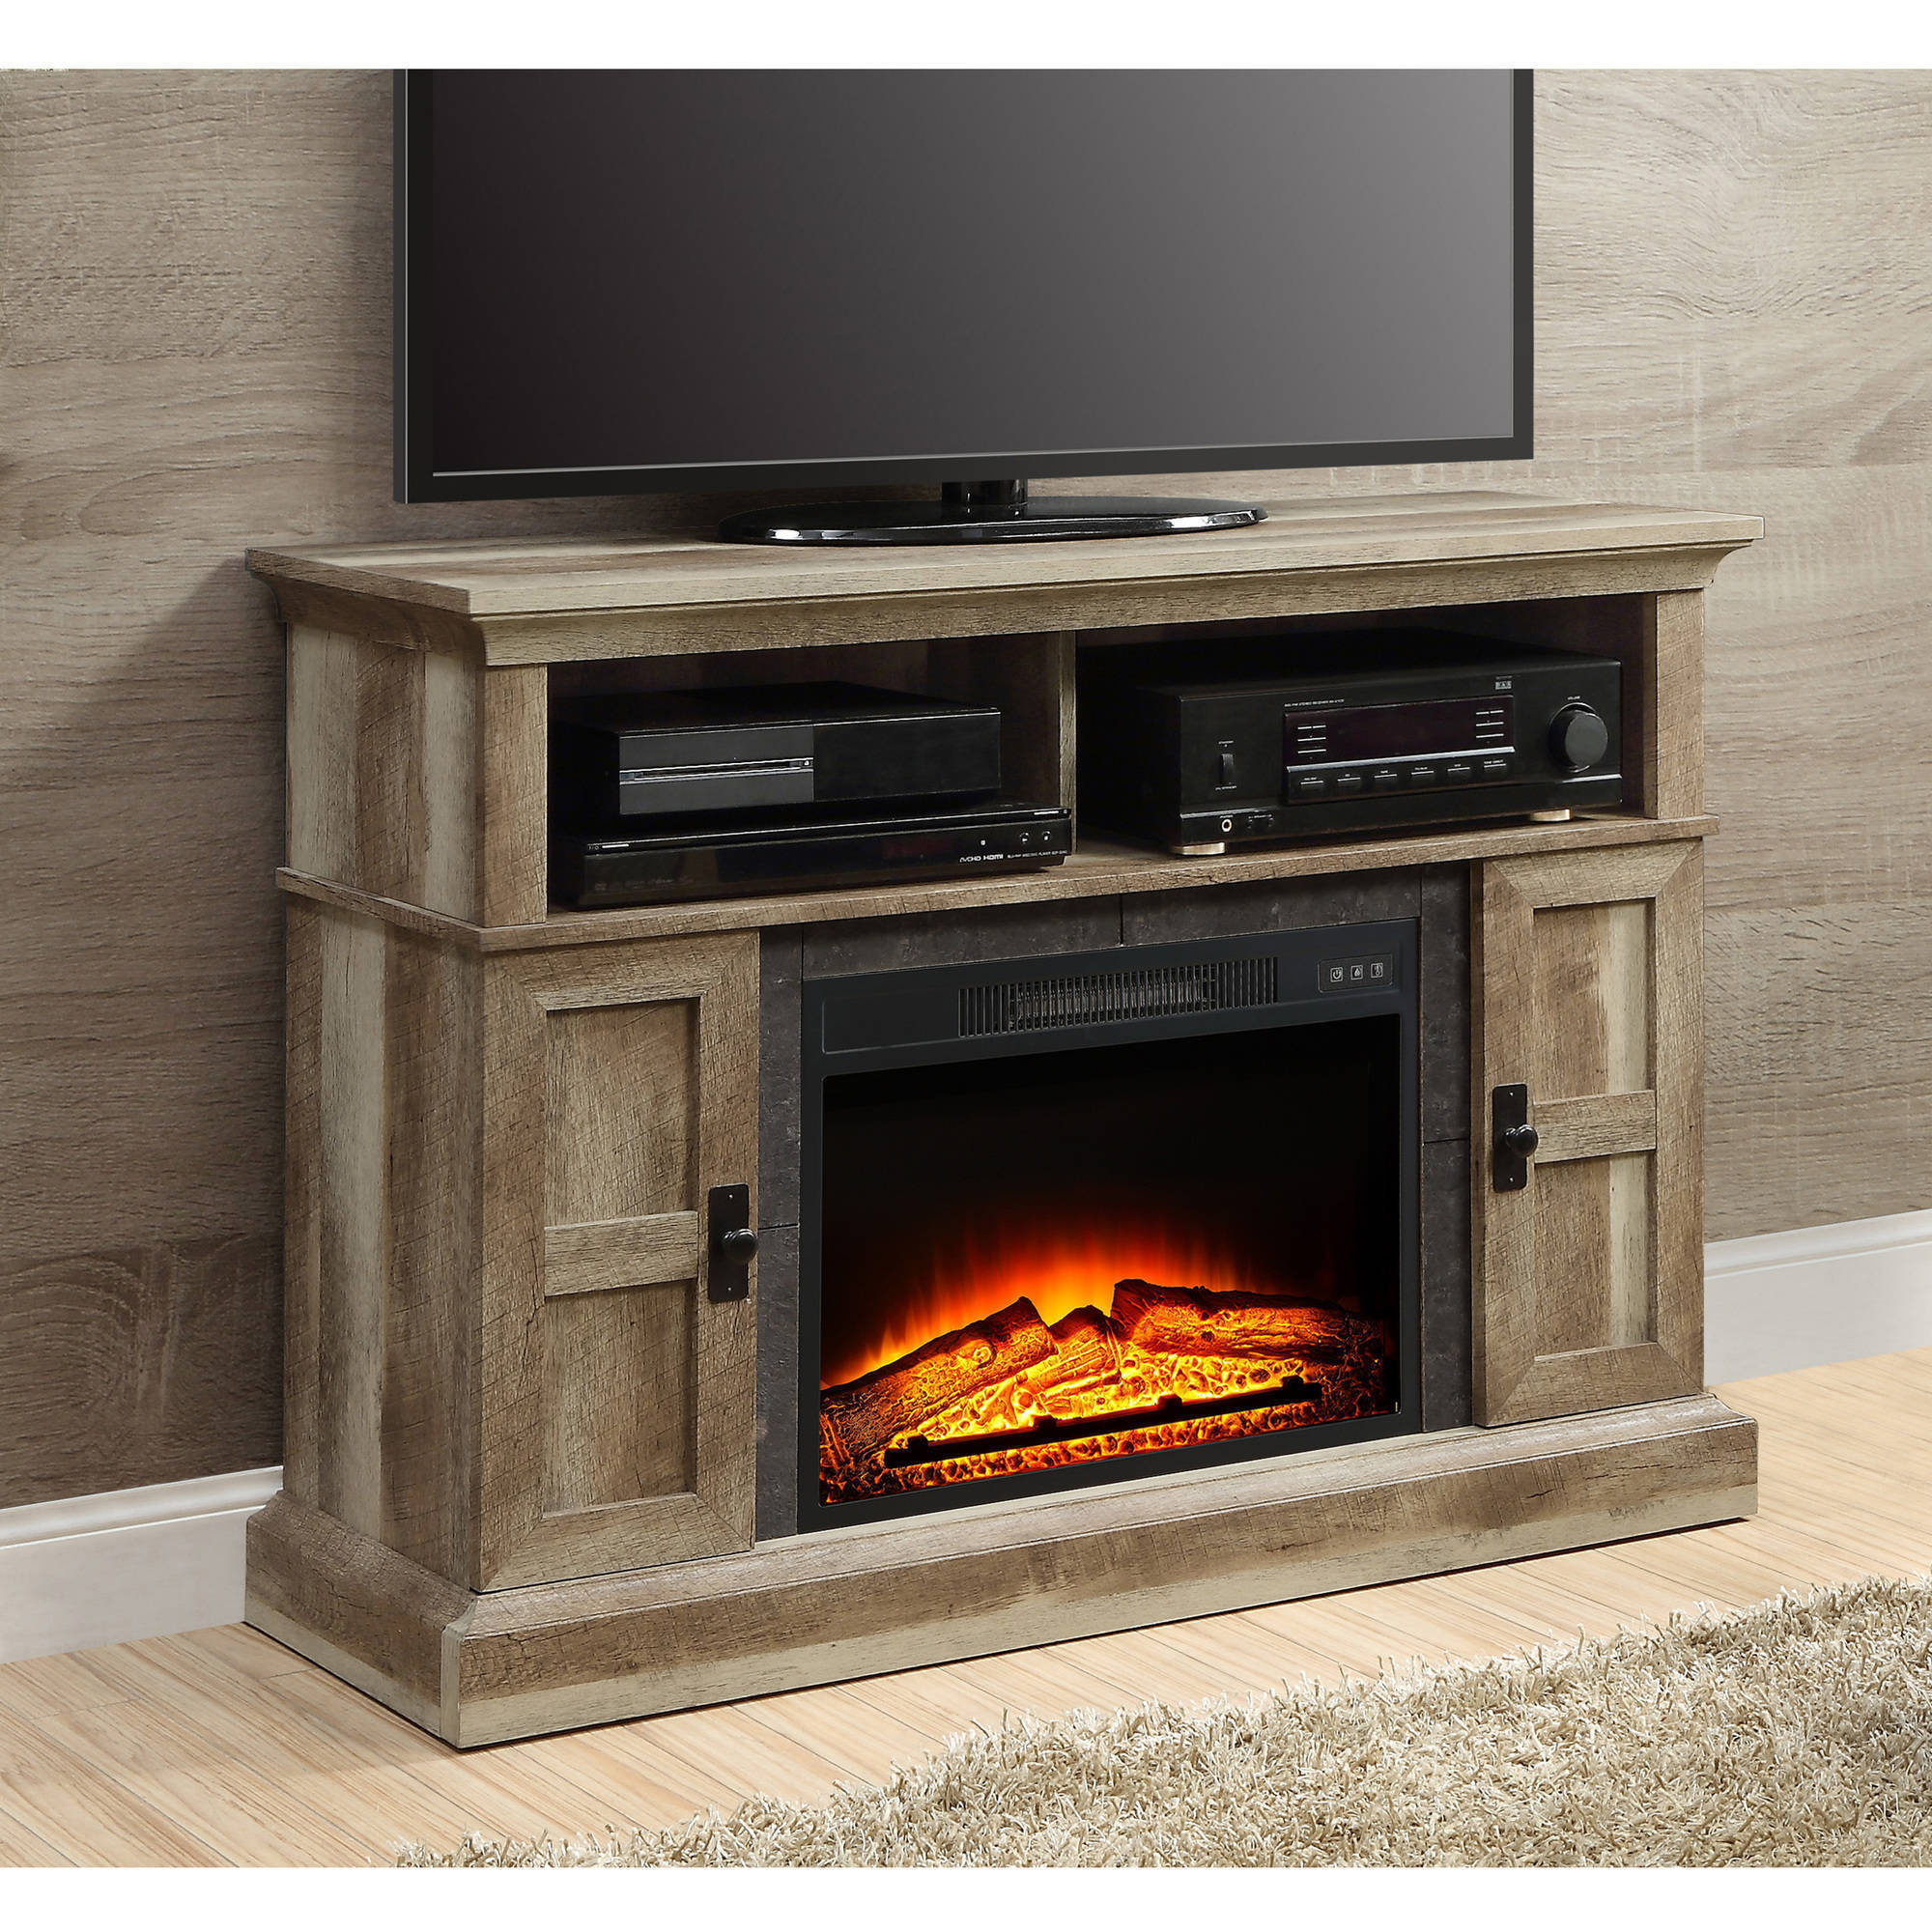 55 Inch Corner Tv Stand with Fireplace Unique Fireplace Tv Stand for 55 Tv